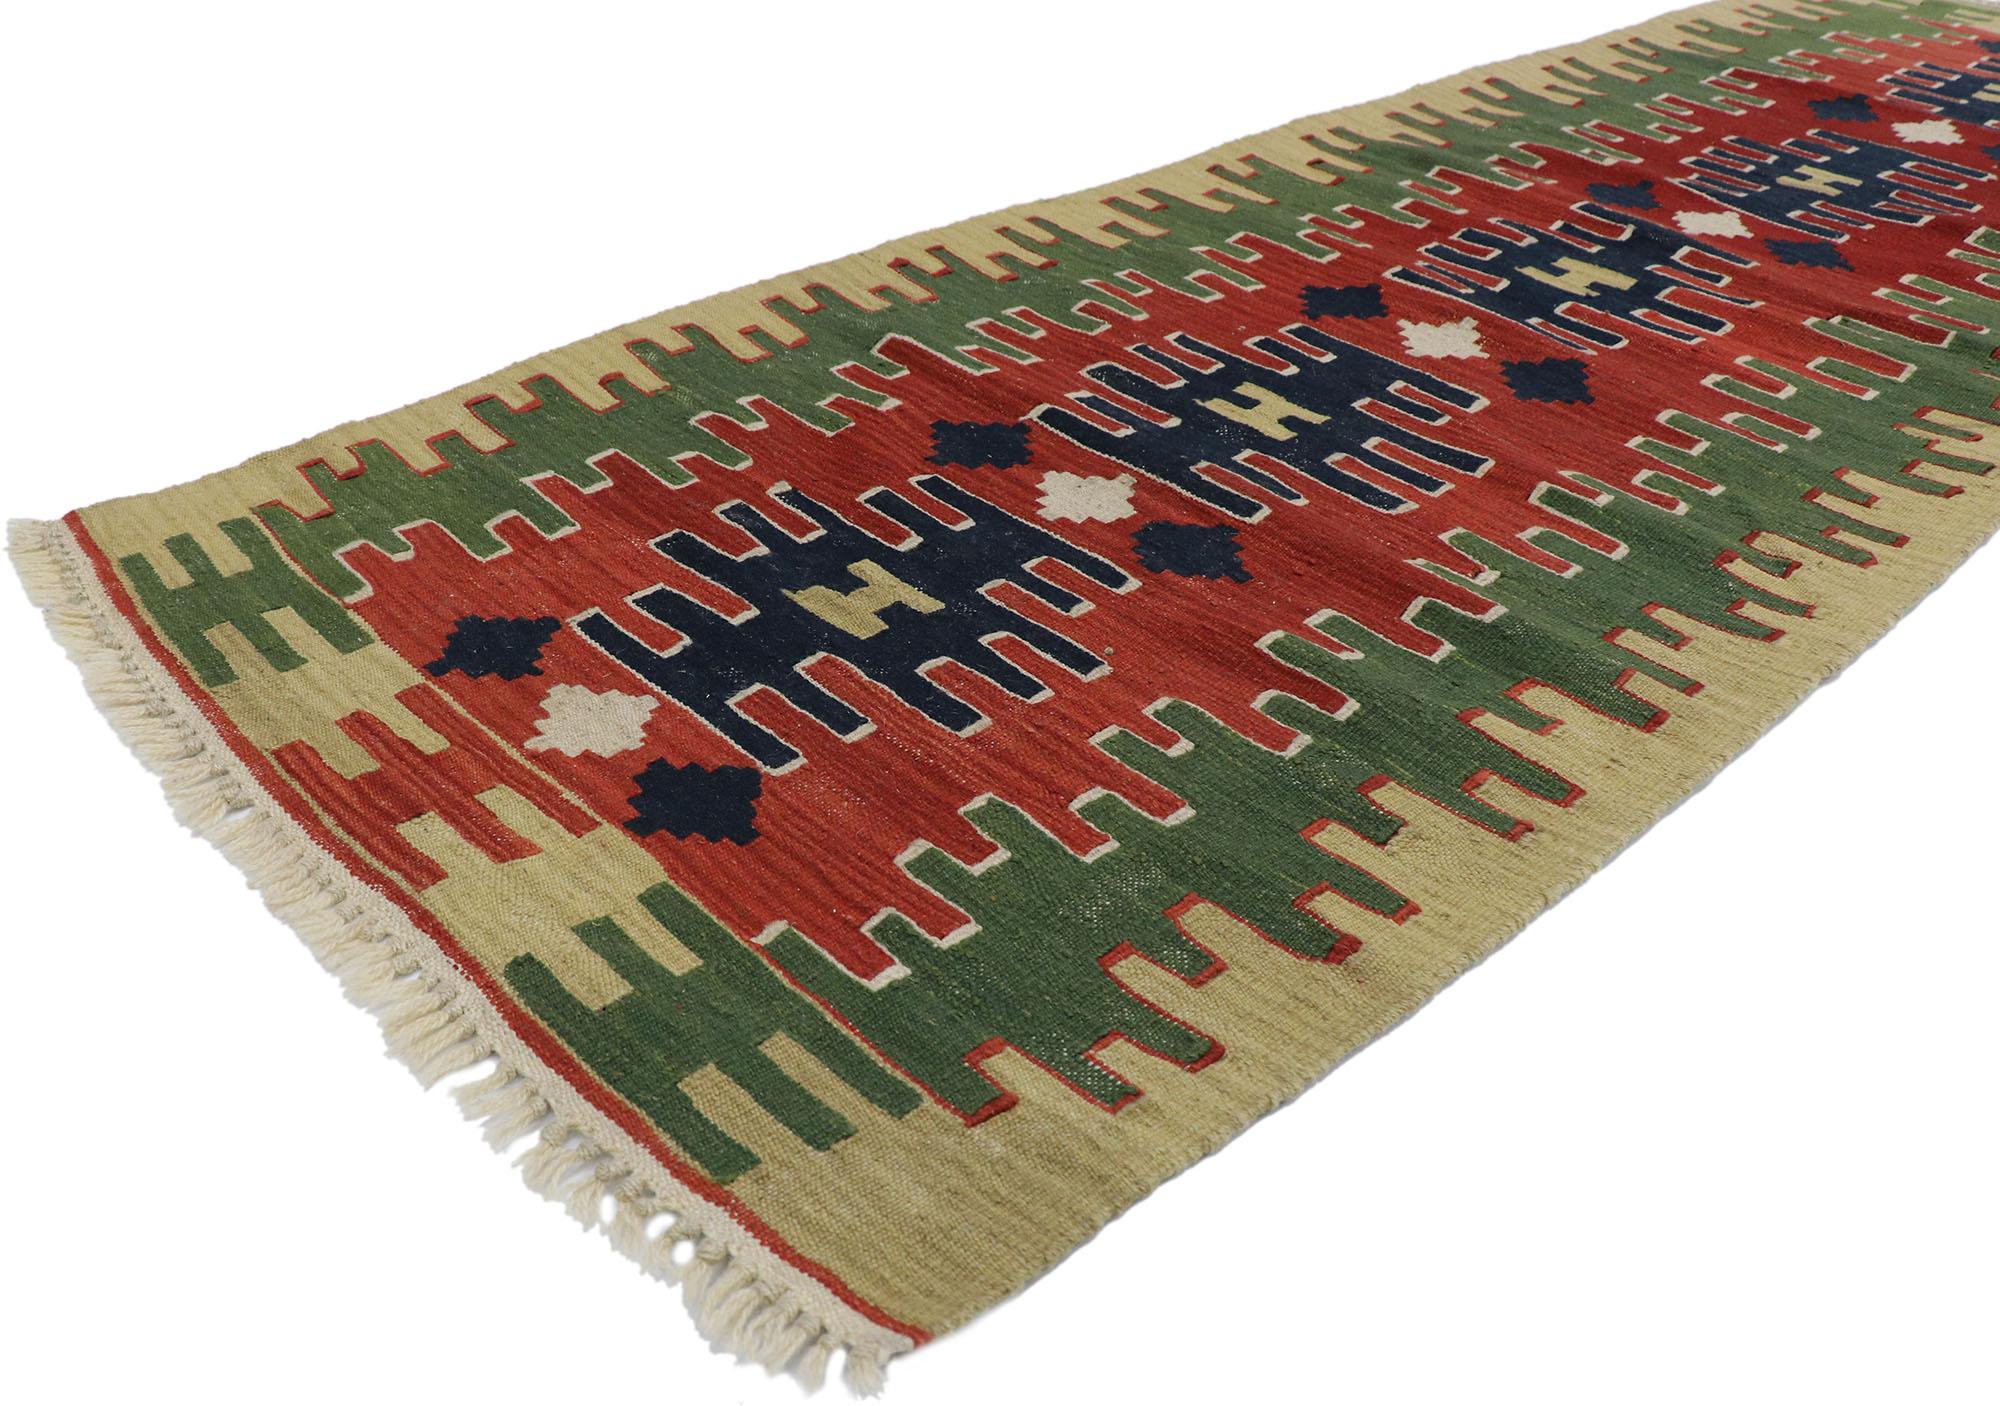 78051 Vintage Persian Shiraz Kilim runner with Tribal Style 02'07 x 07'09. Full of tiny details and a bold expressive design combined with vibrant colors and tribal style, this hand-woven wool vintage Persian Shiraz kilim runner is a captivating